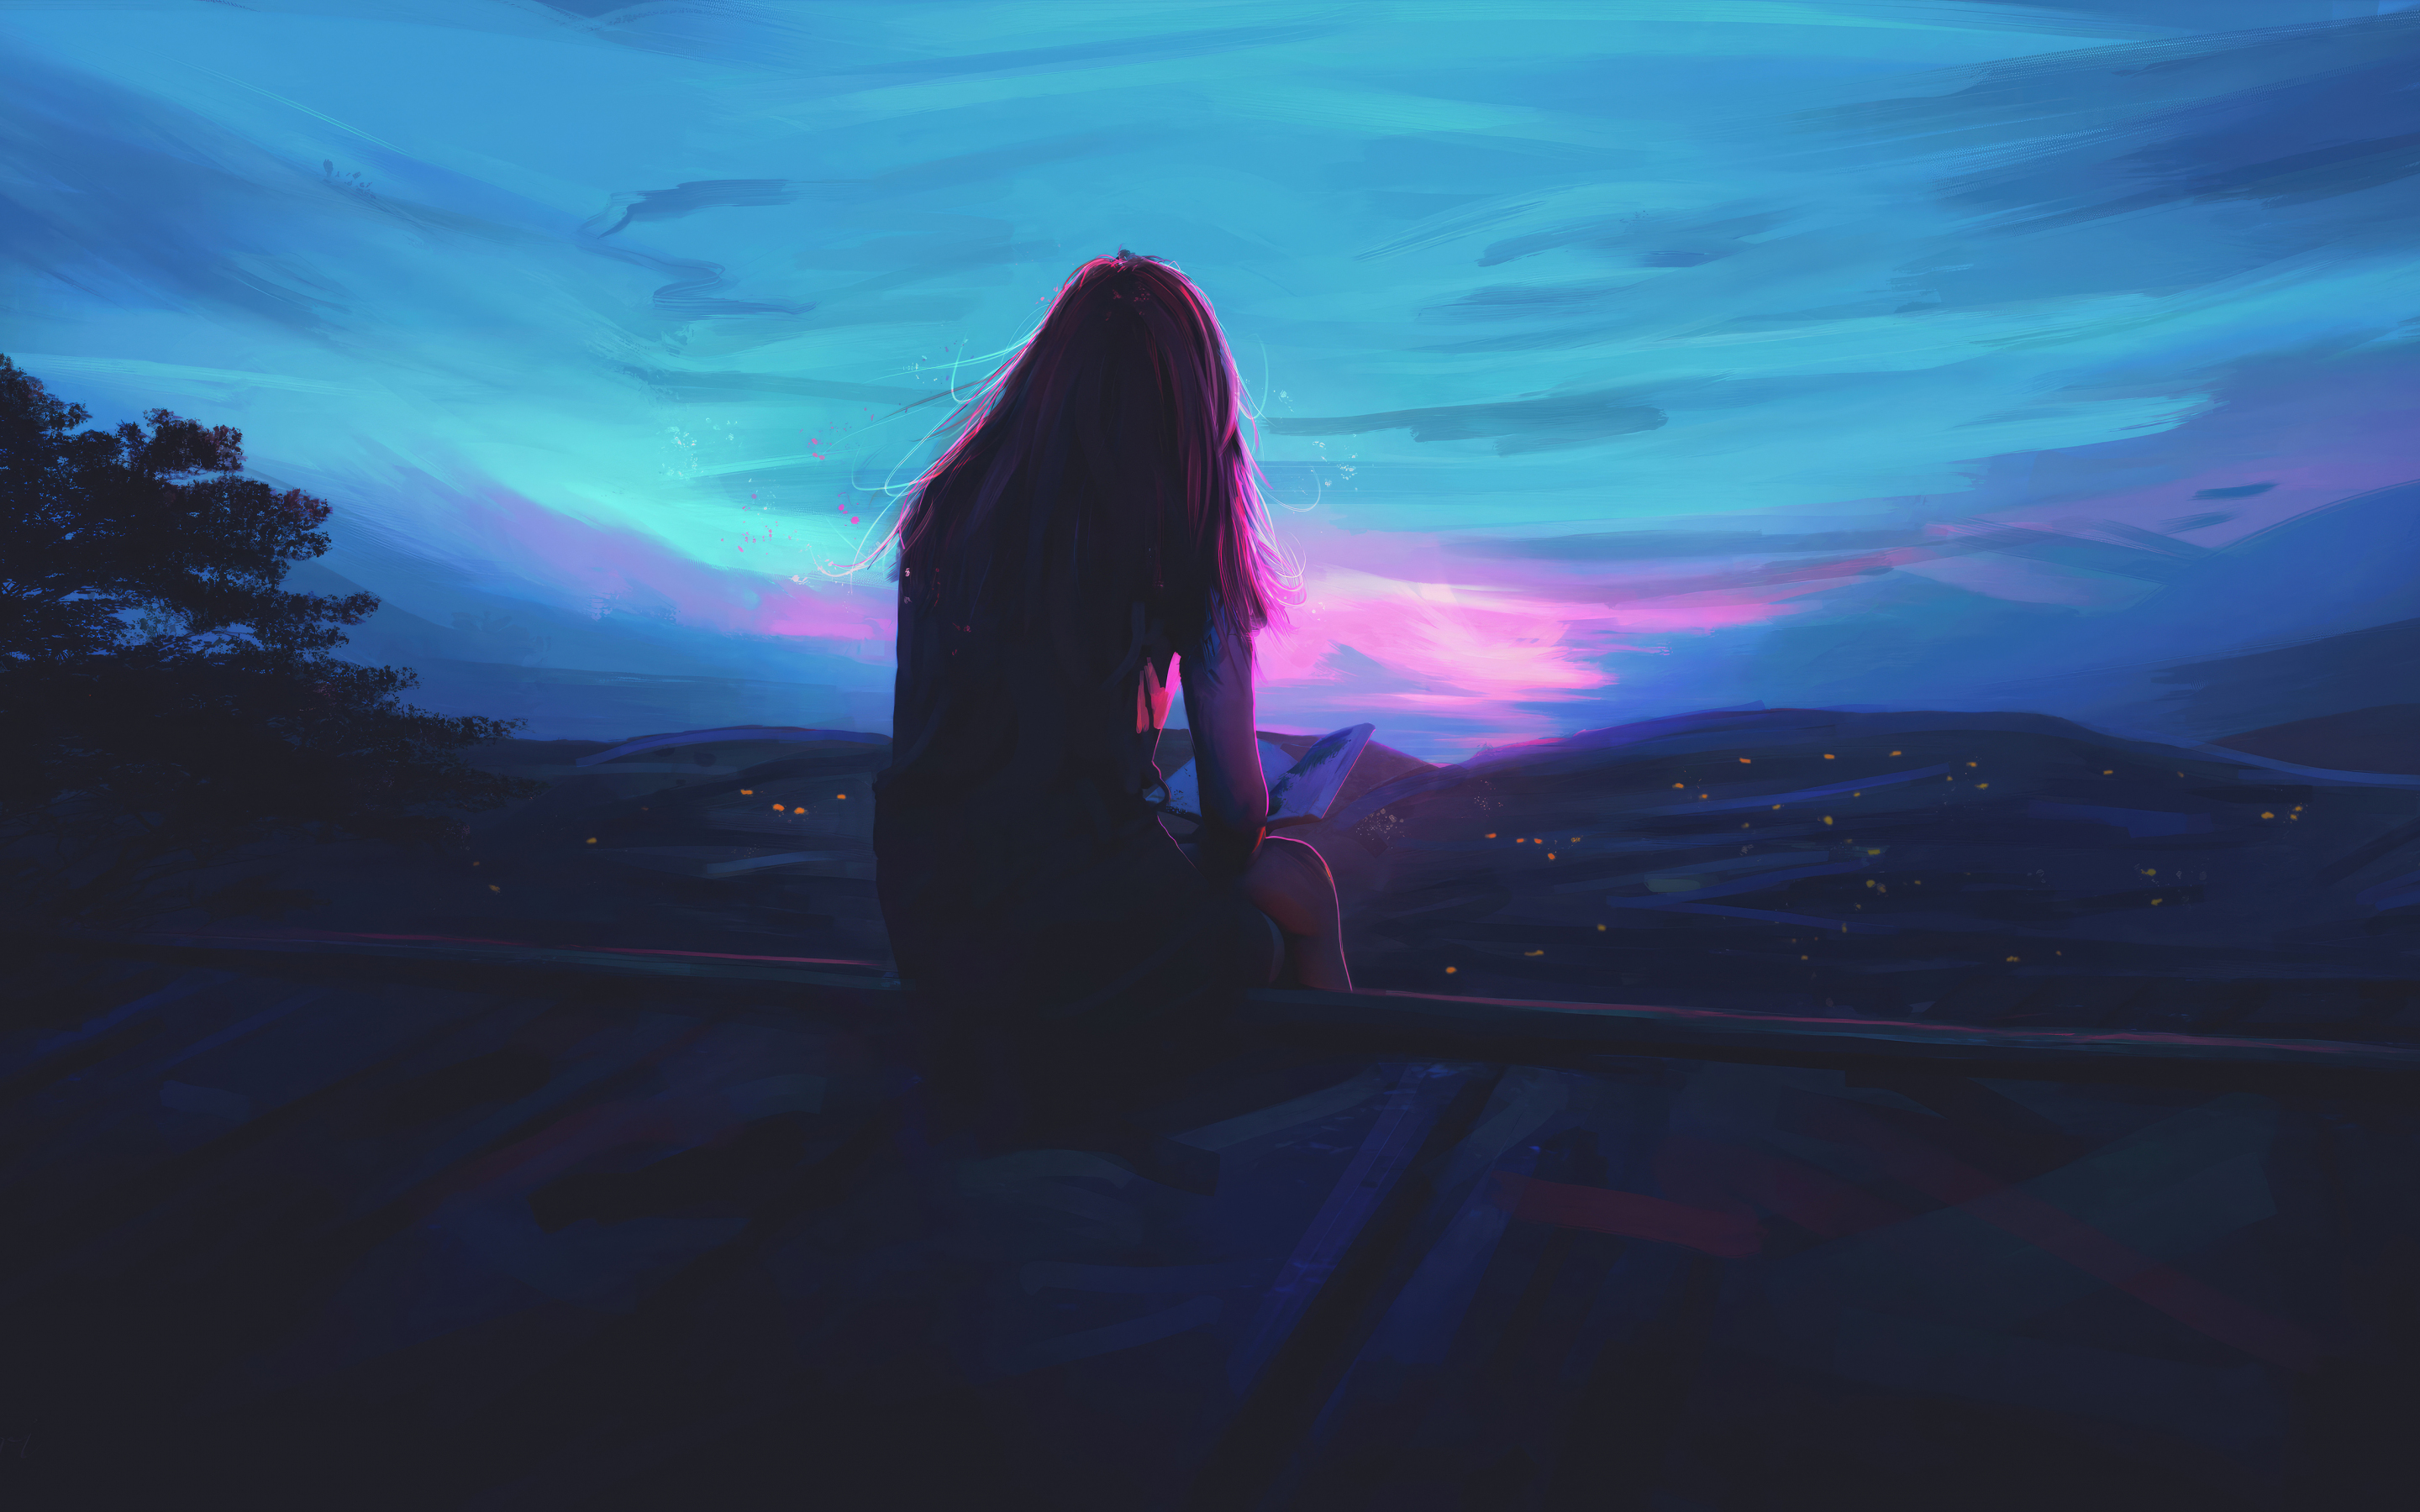 Great place for reading, girl sitting on the fence, sunset, art, 2880x1800 wallpaper